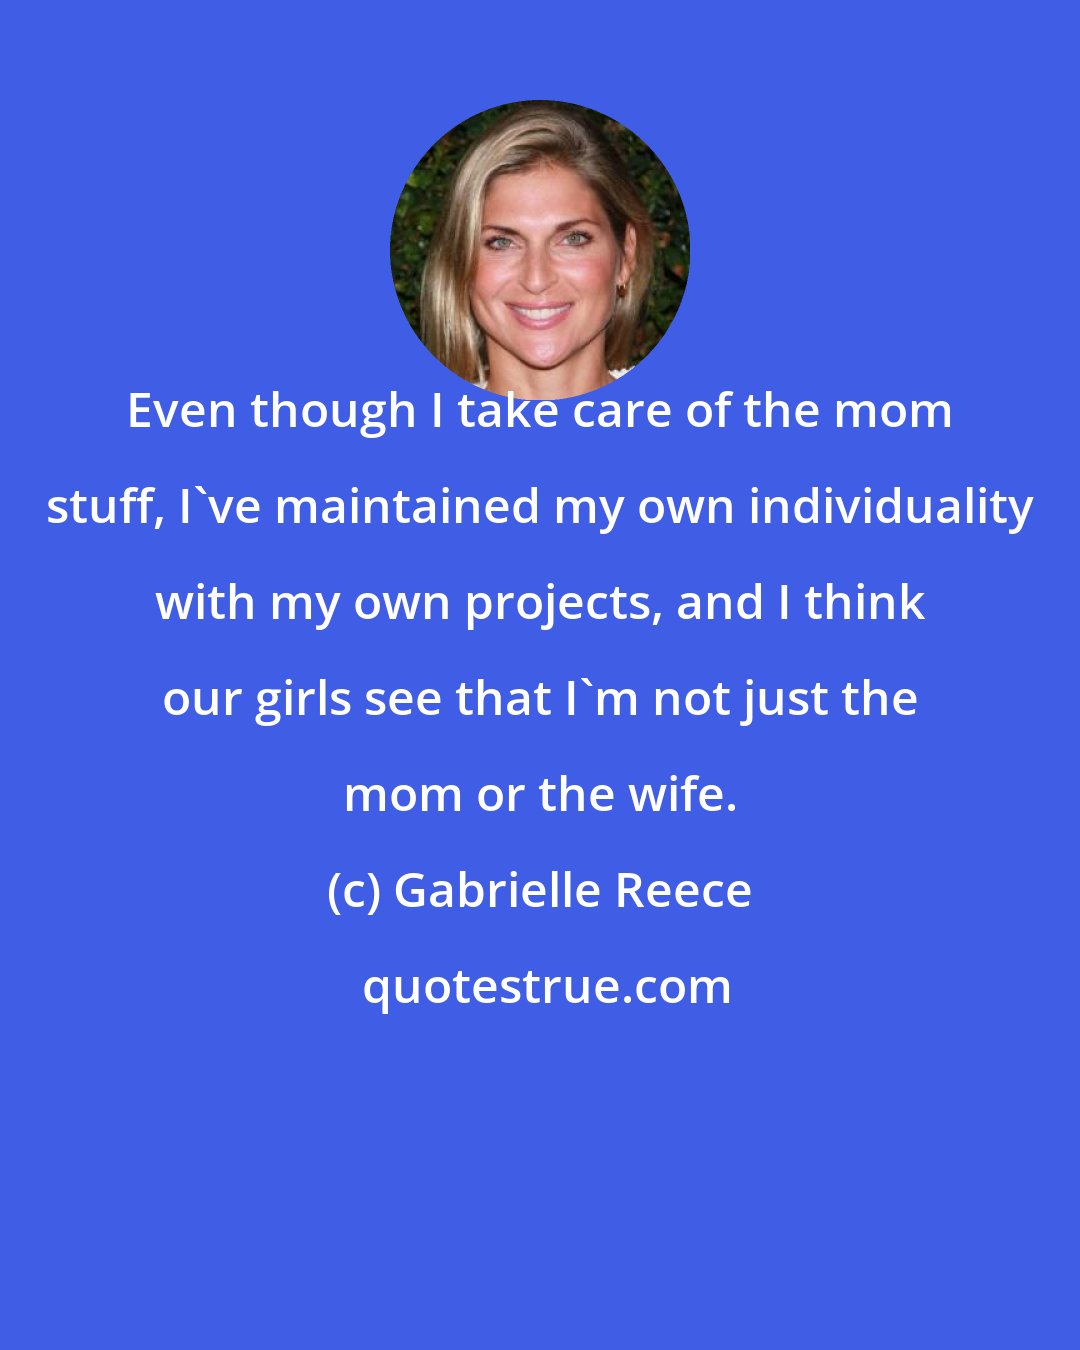 Gabrielle Reece: Even though I take care of the mom stuff, I've maintained my own individuality with my own projects, and I think our girls see that I'm not just the mom or the wife.